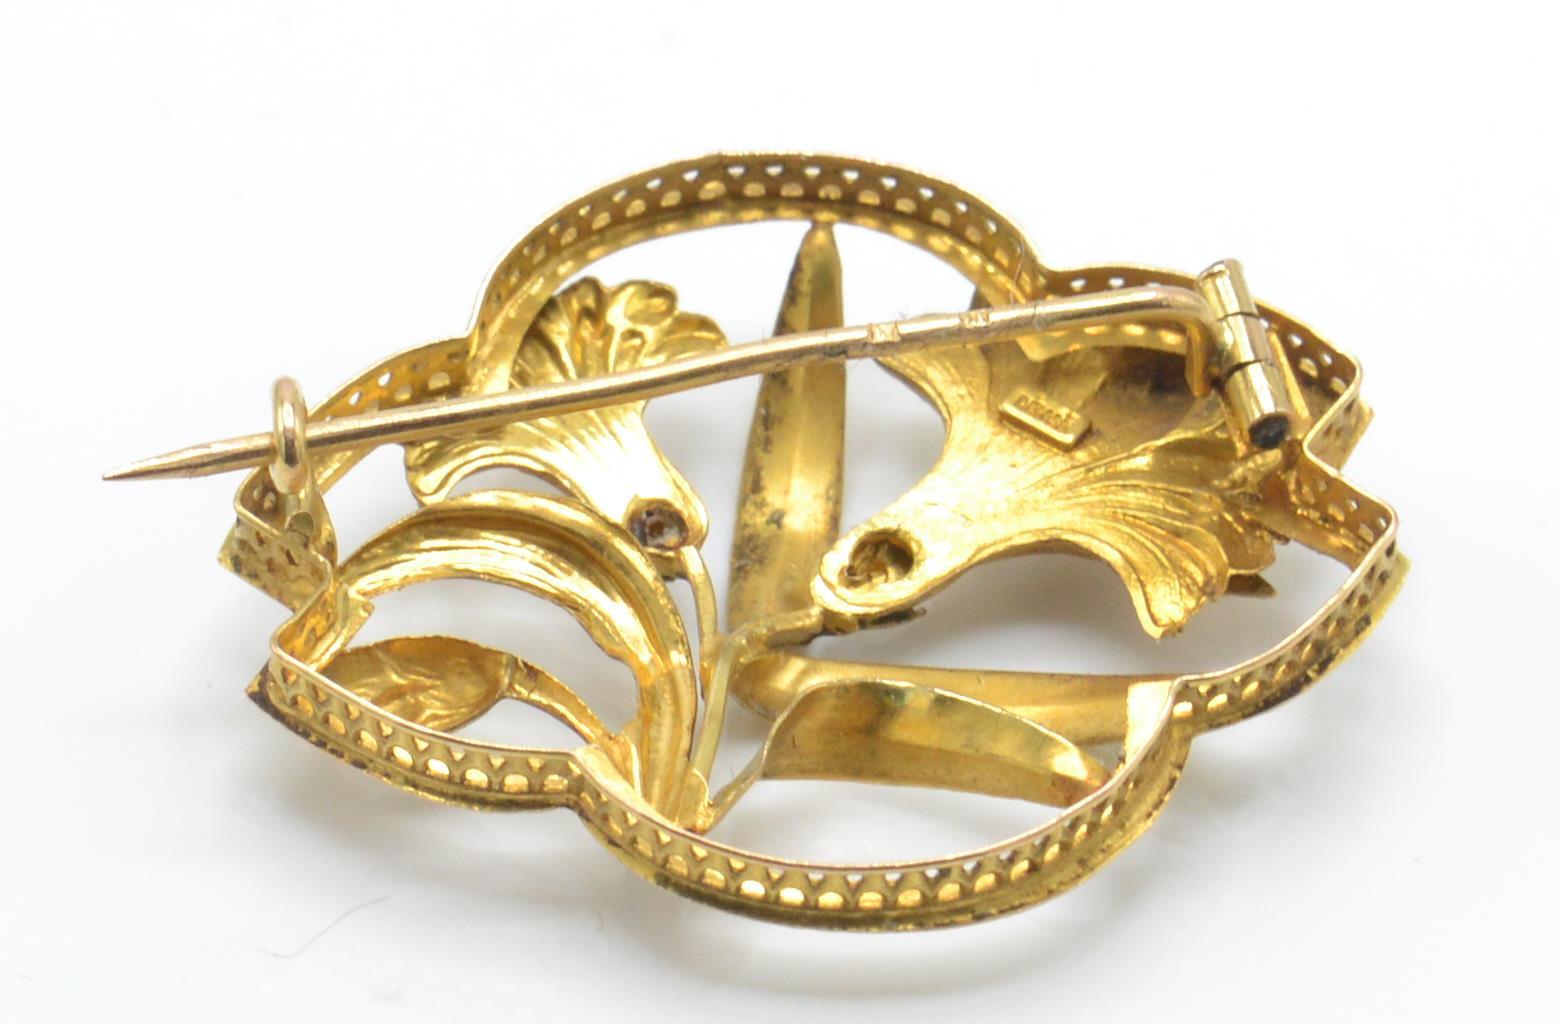 A French Art Nouveau gold and diamond brooch pin - Image 3 of 4